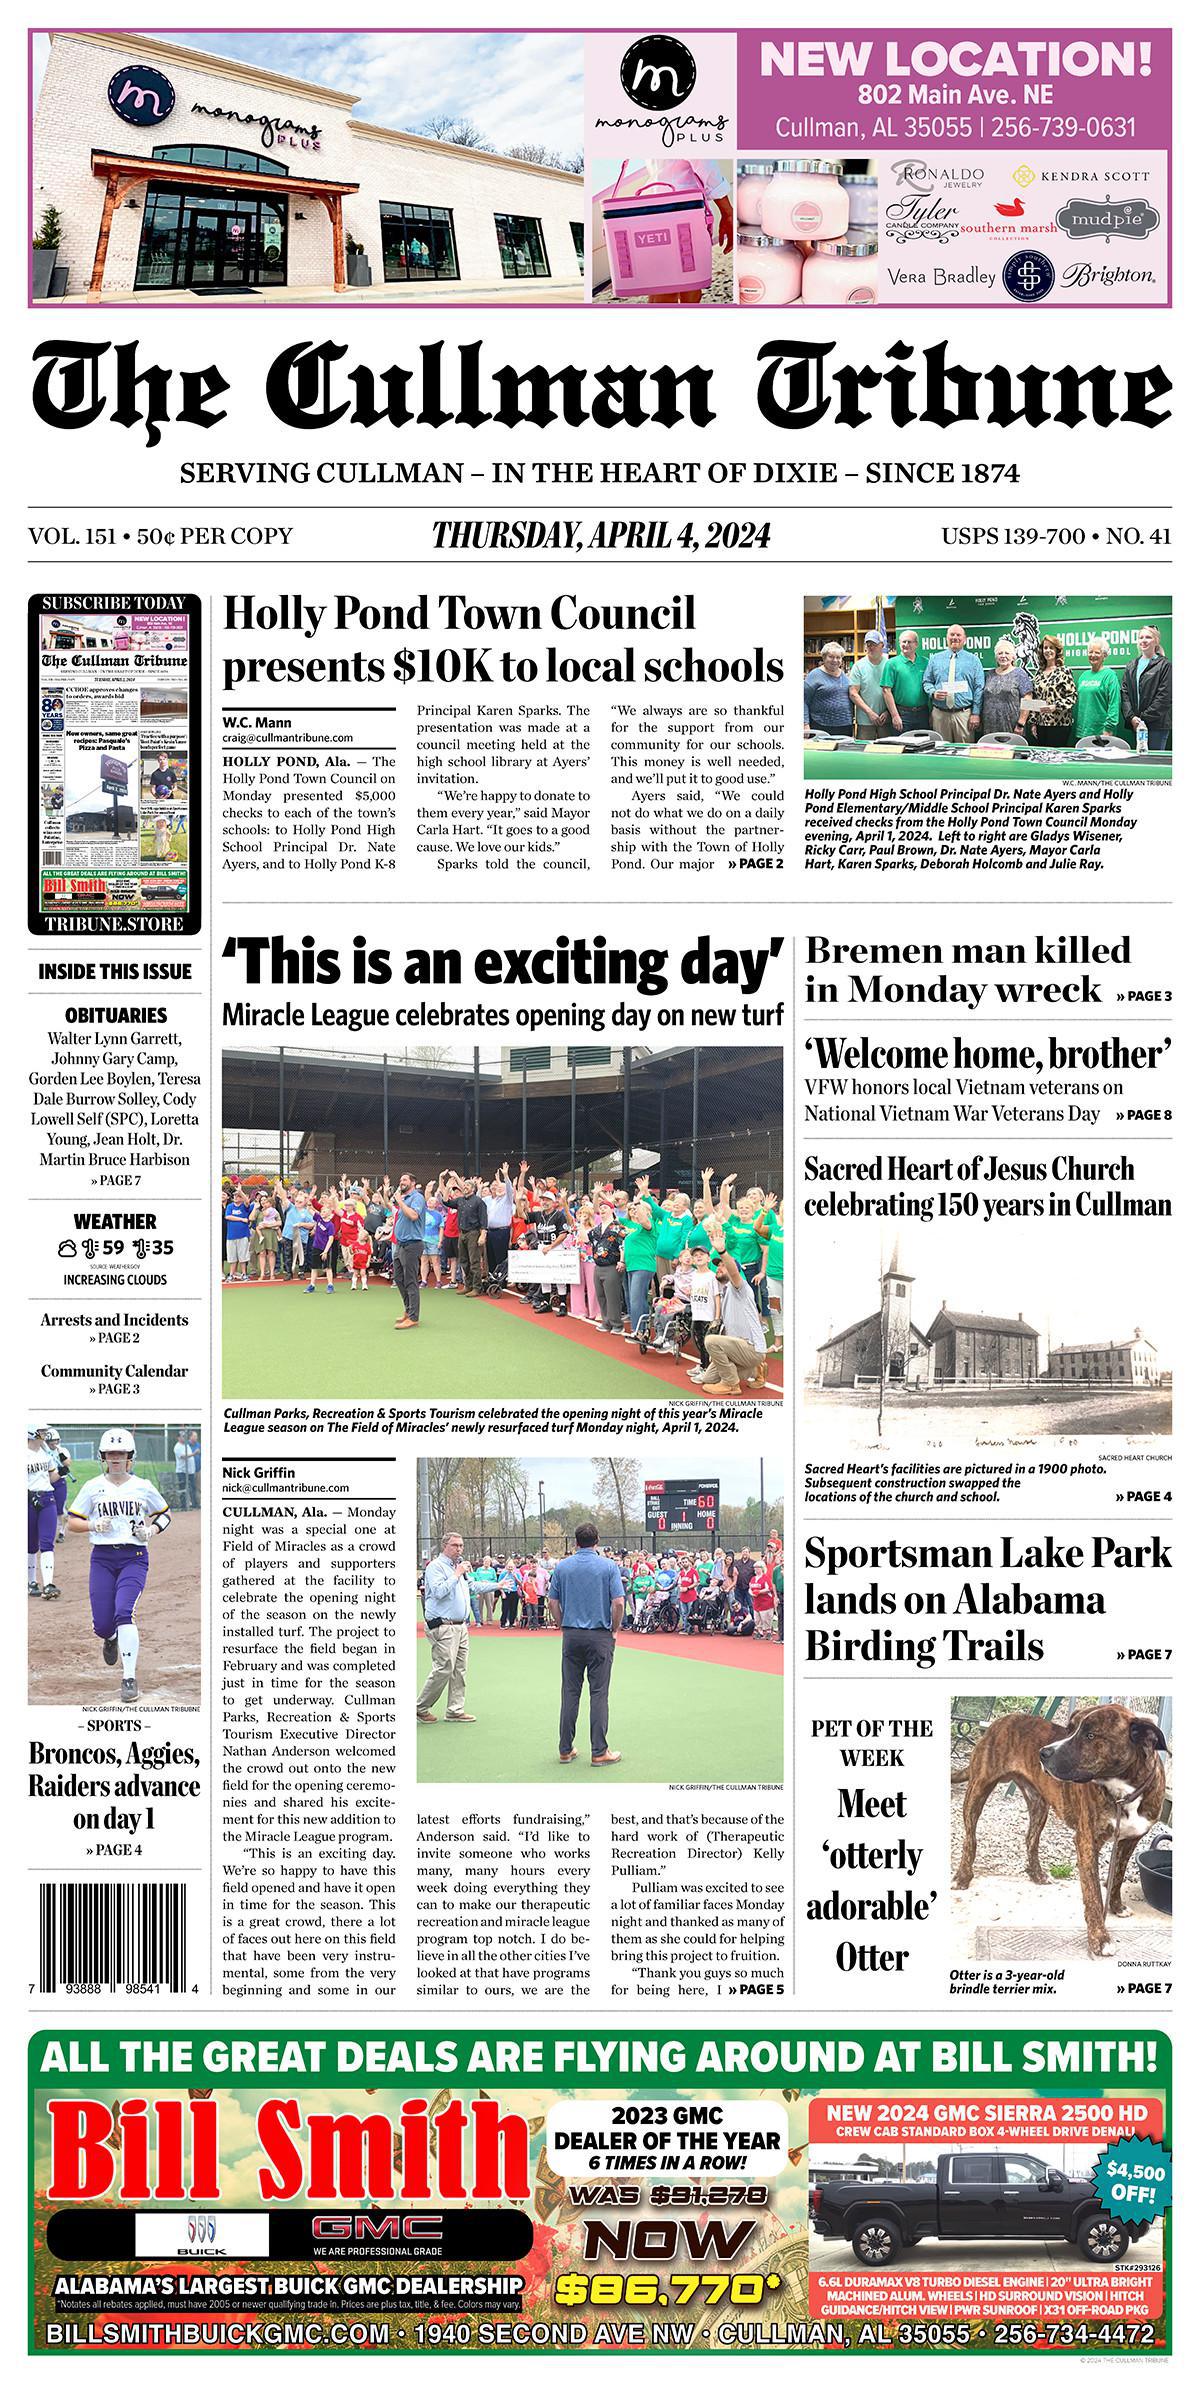 Good Morning Cullman! The 04-04-2024 edition of the Cullman Tribune is now ready to view.